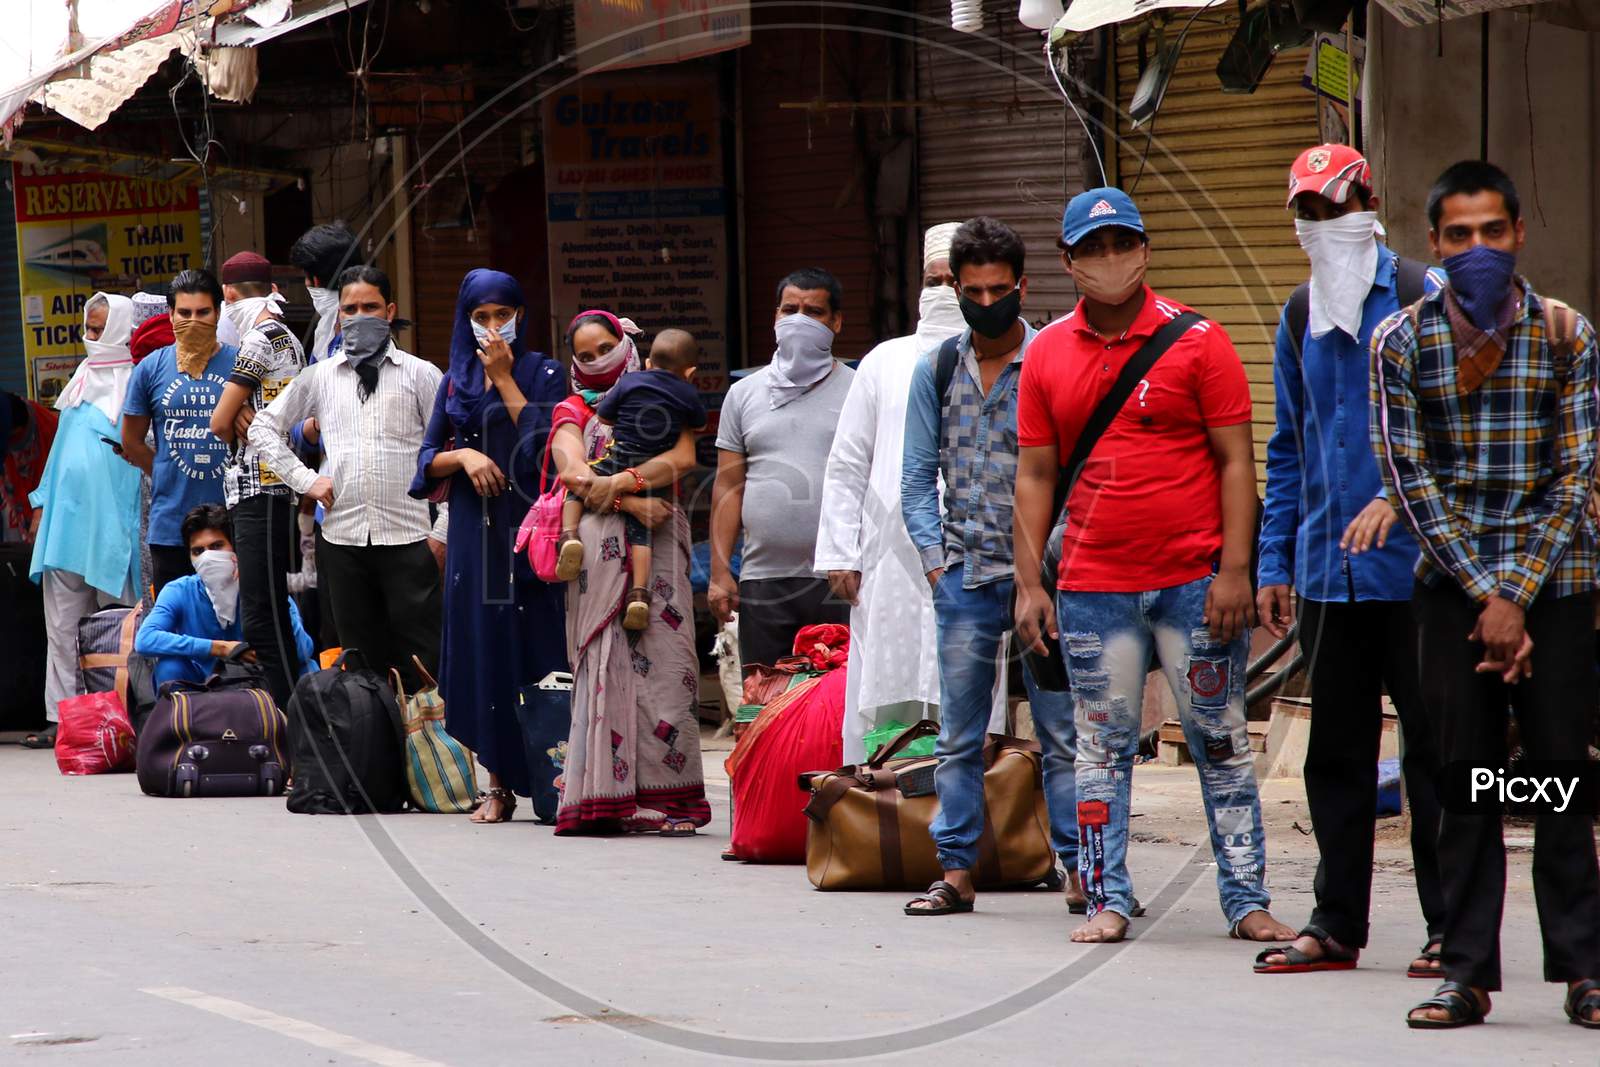 Stranded Pilgrims Wait For Special Train Going To Bihar State From Ajmer Railway Station During A Government-Imposed Nationwide Lockdown As A Preventive Measure Against The Covid-19 Coronavirus, In Ajmer On May 13, 2020.